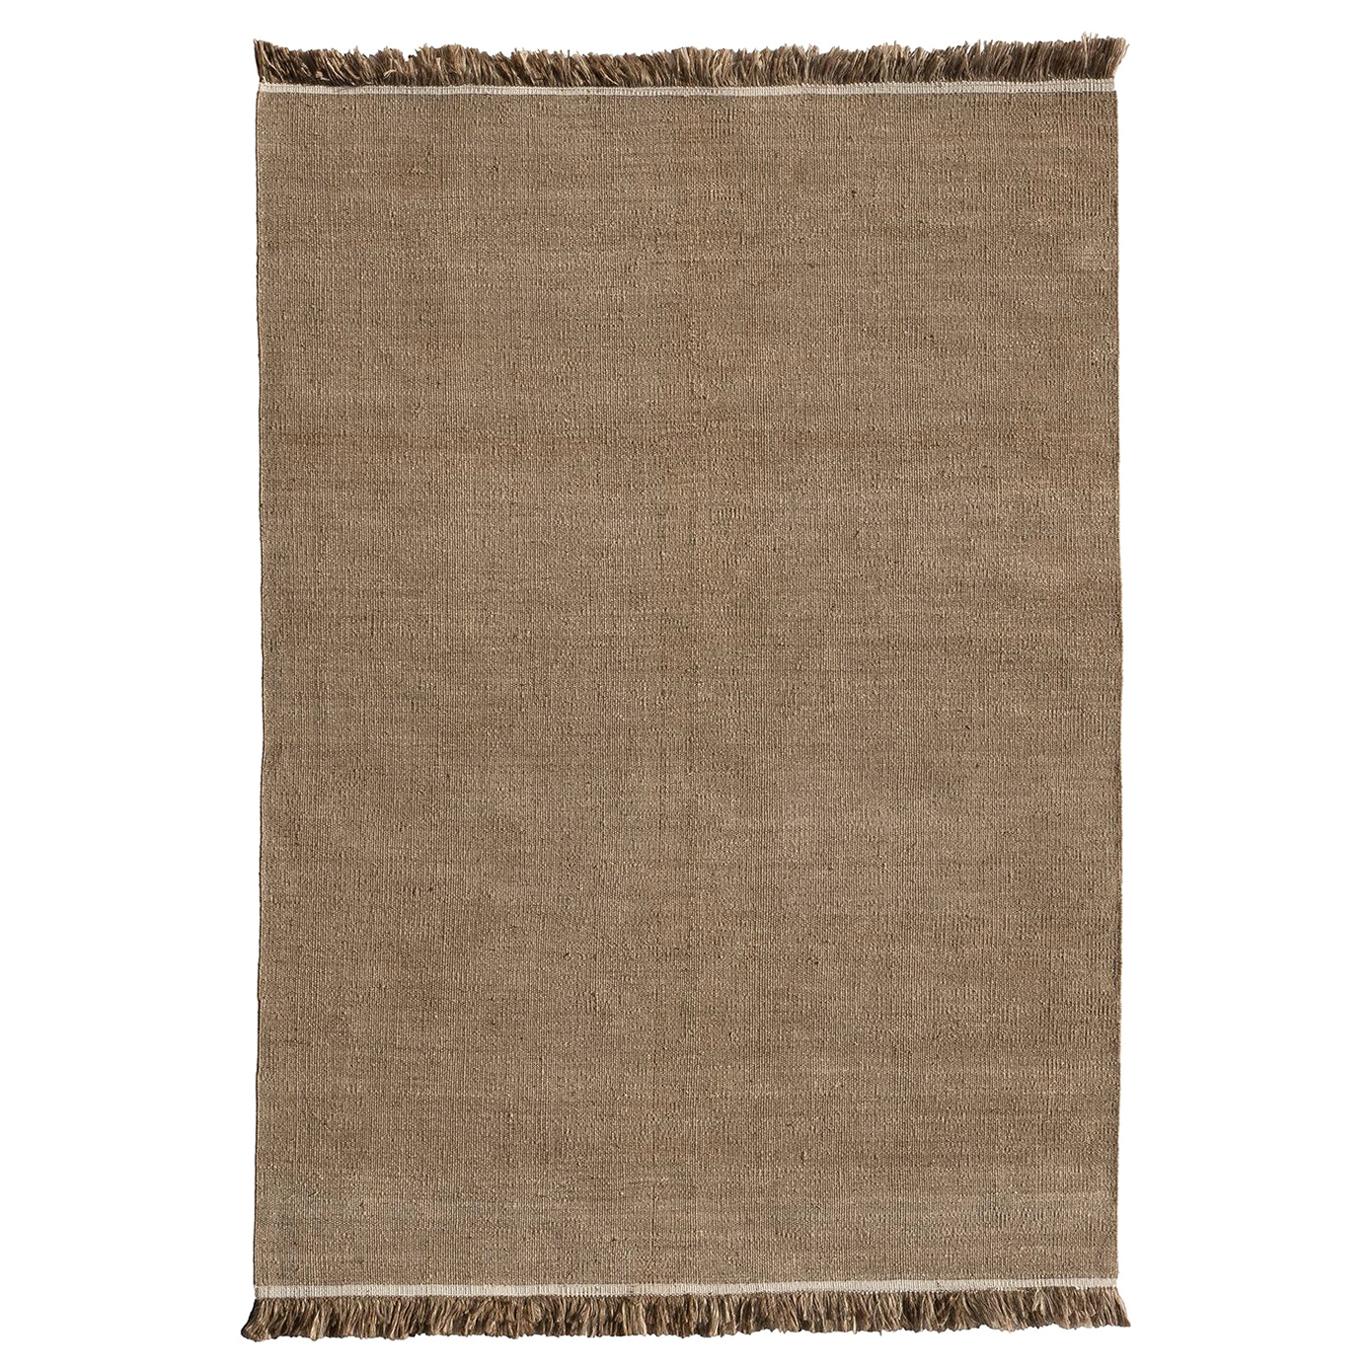 Nanimarquina Wellbeing Nettle Dhurrie Rug by Ilse Crawford, Small For Sale